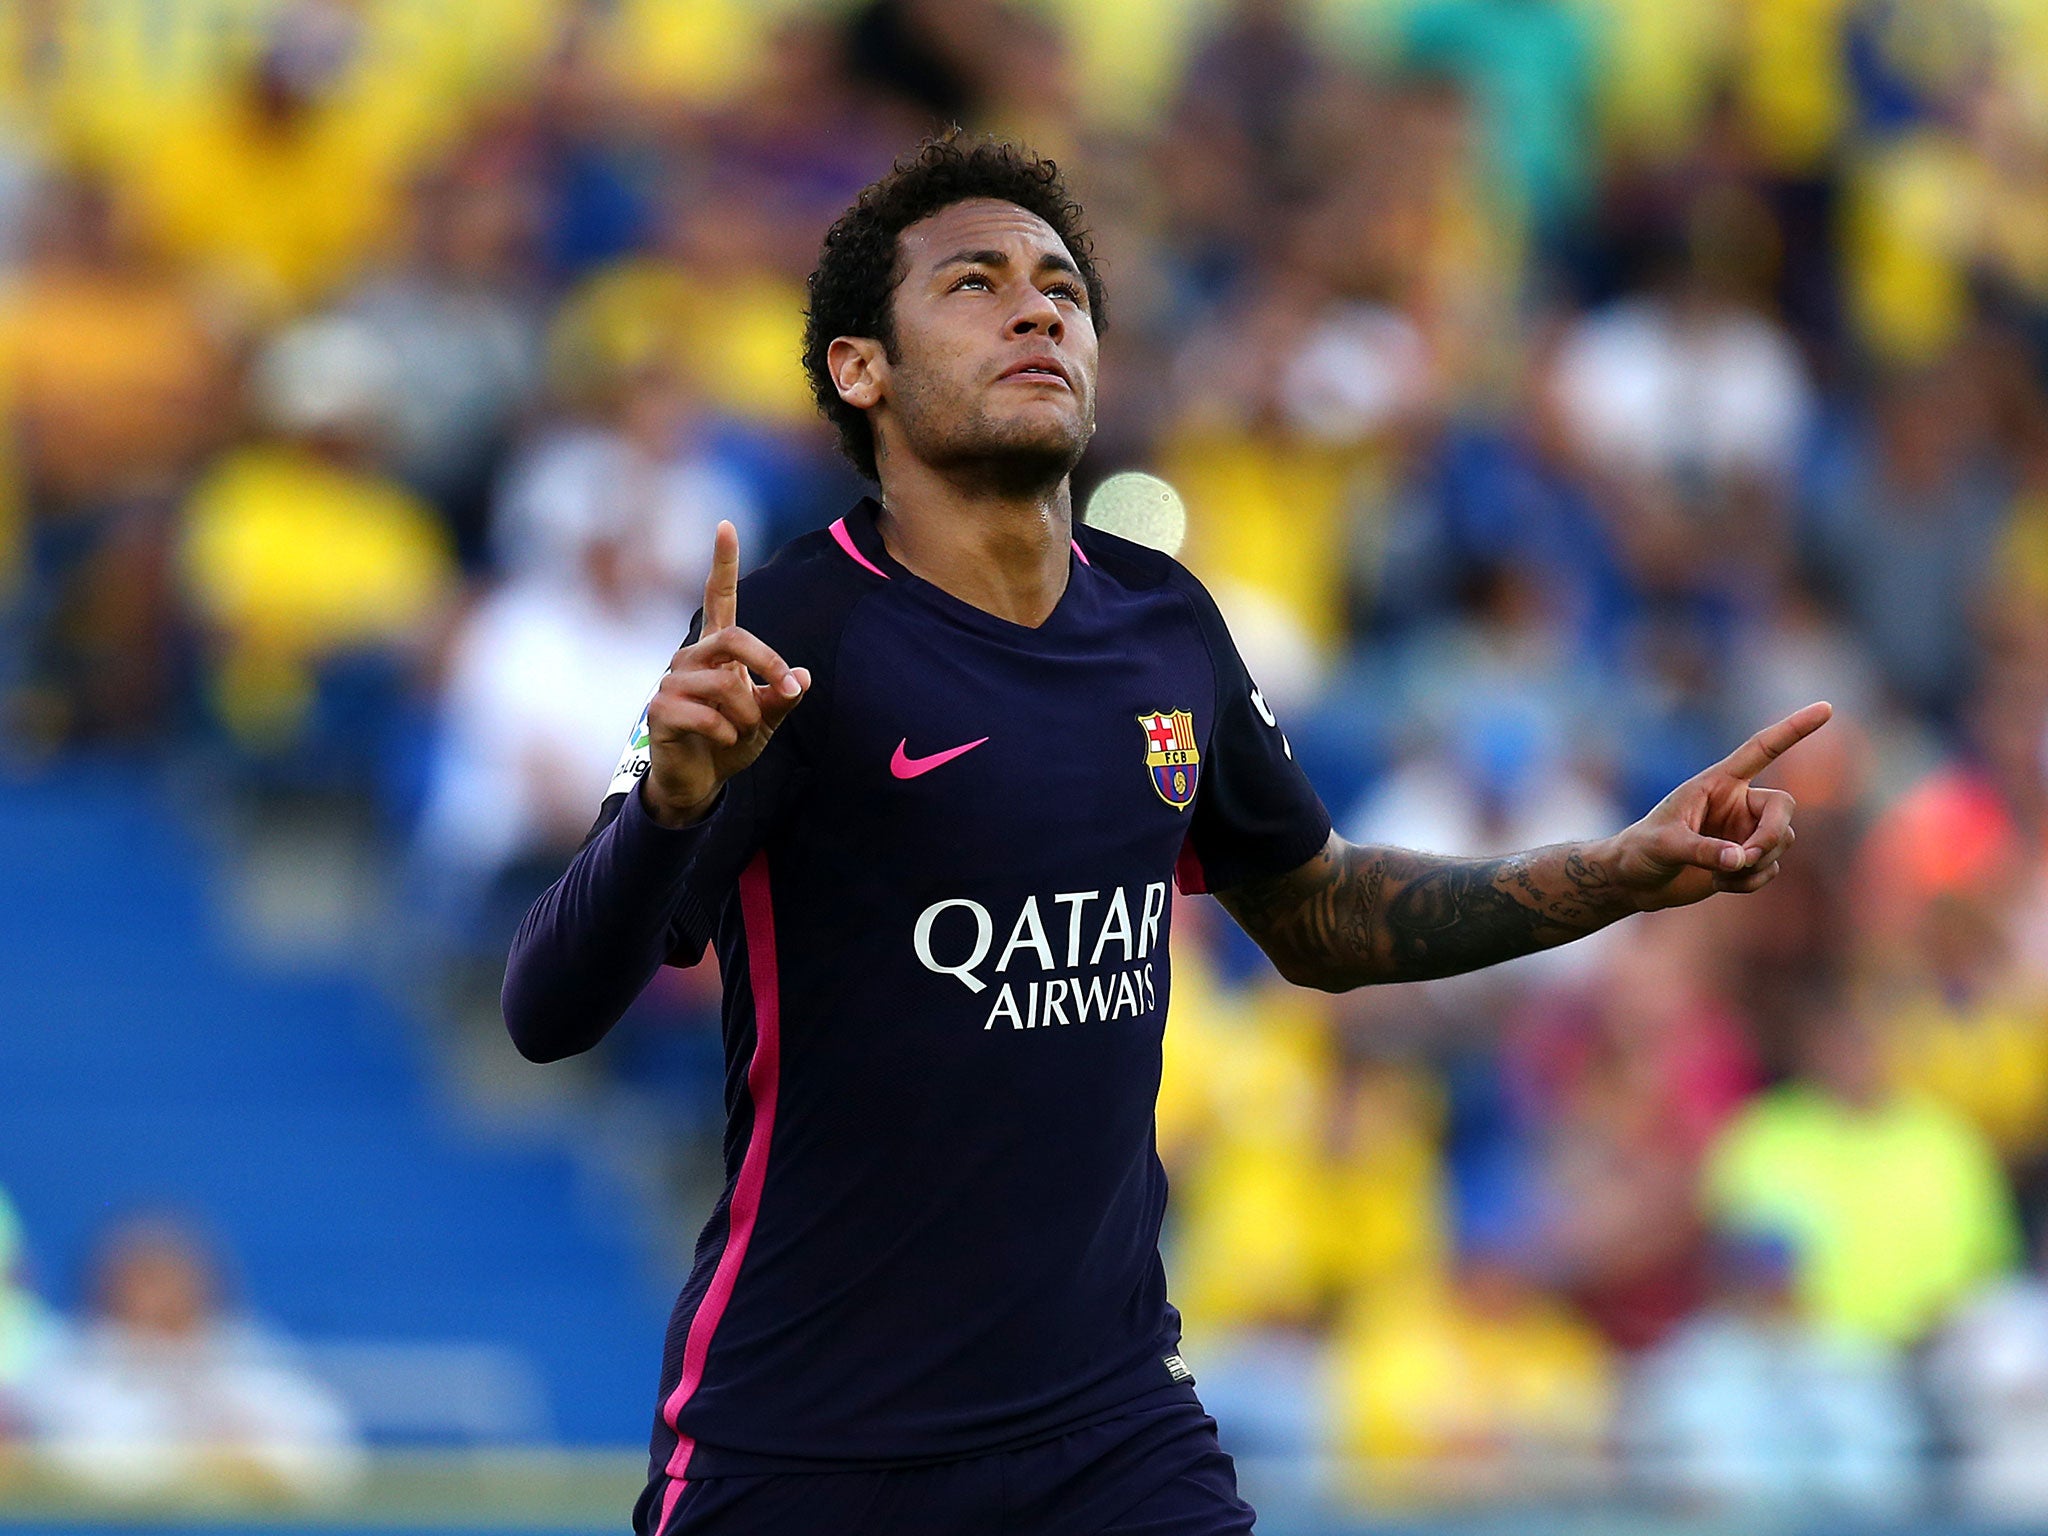 Neymar says he wants to play with Messi and remain in Barcelona